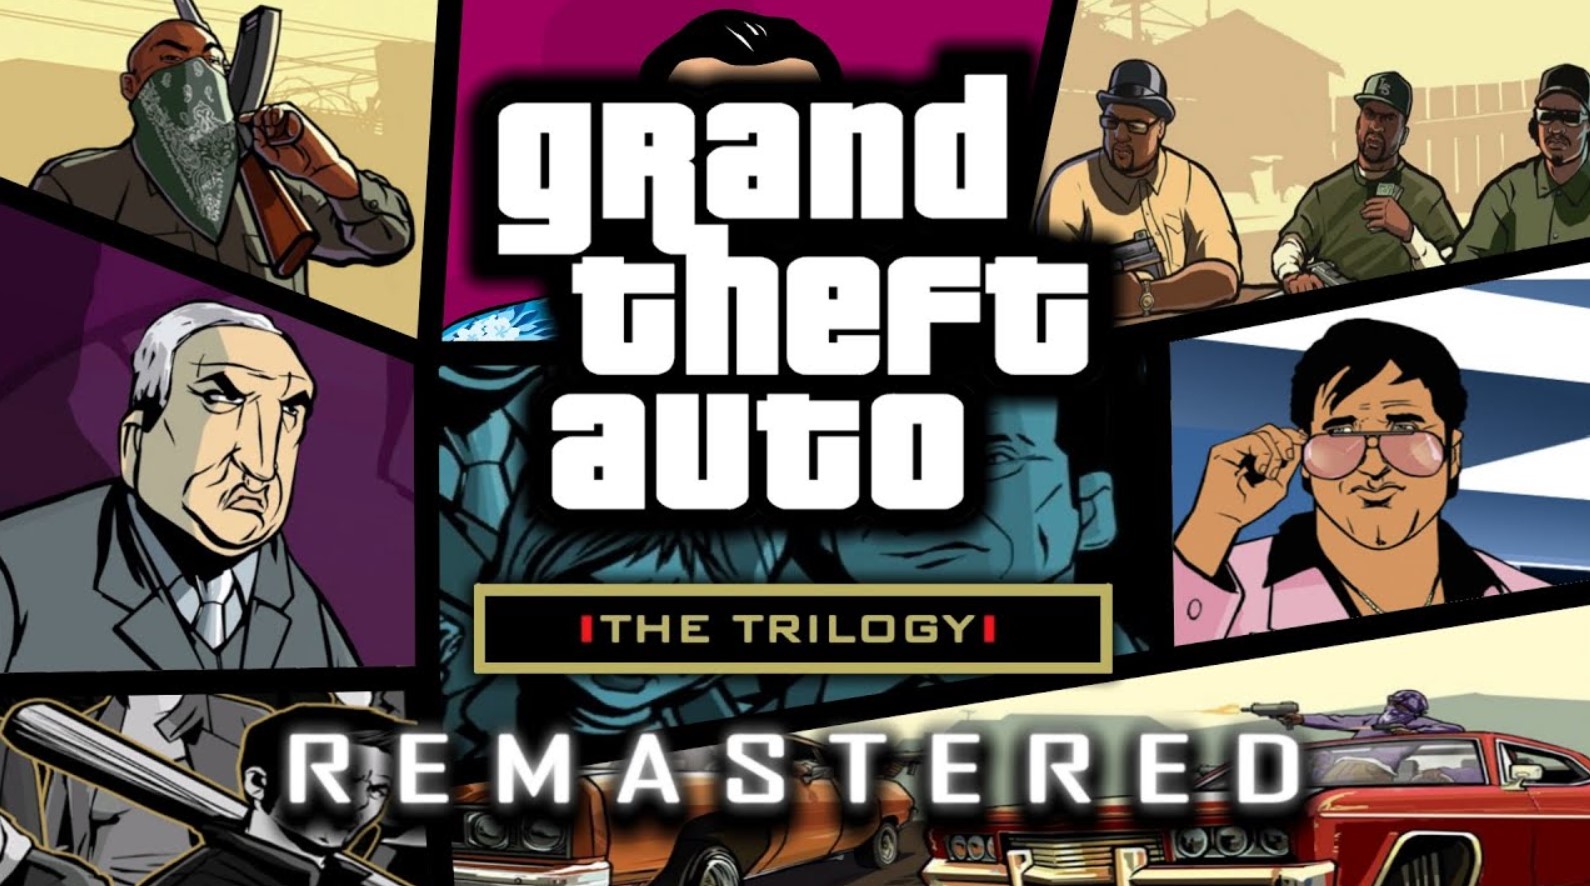 Grand Theft Auto The Trilogy The Definitive Edition Apk MOD Mobile Android Version Full Free Downloaditive Edition Download PC Game Full Version Free Download